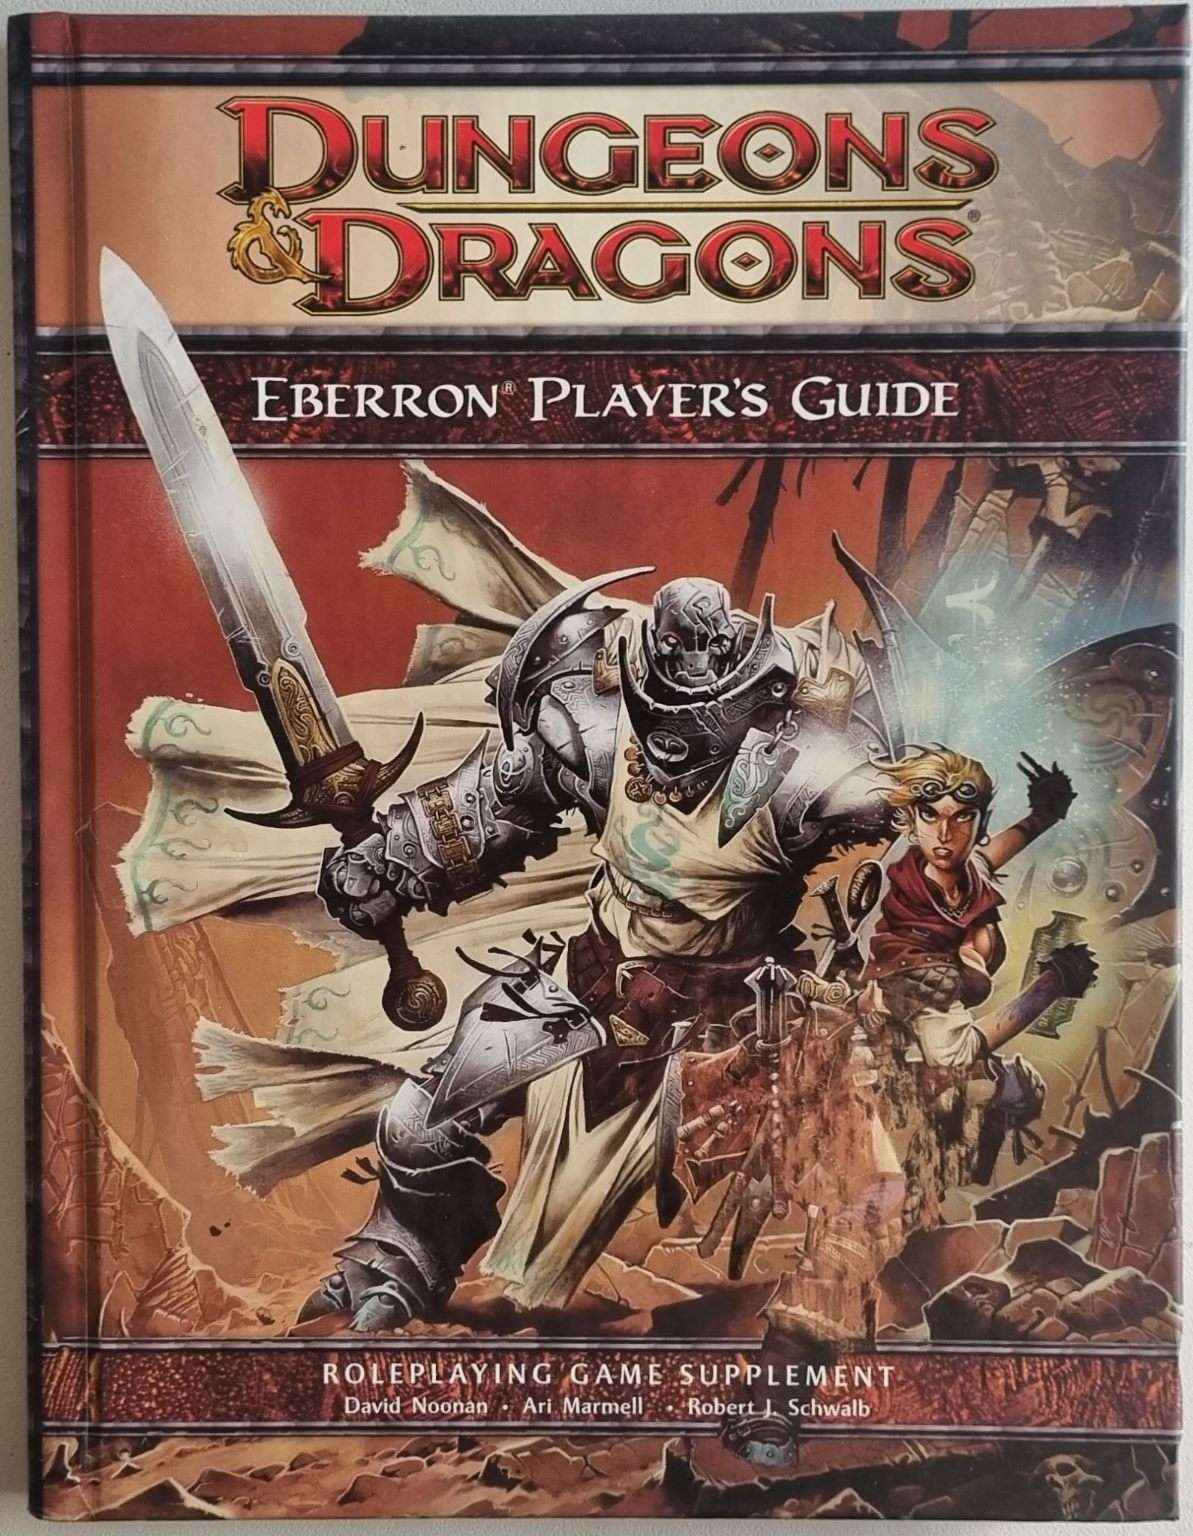 Dungeons and Dragons - Eberron Player's Guide 4e